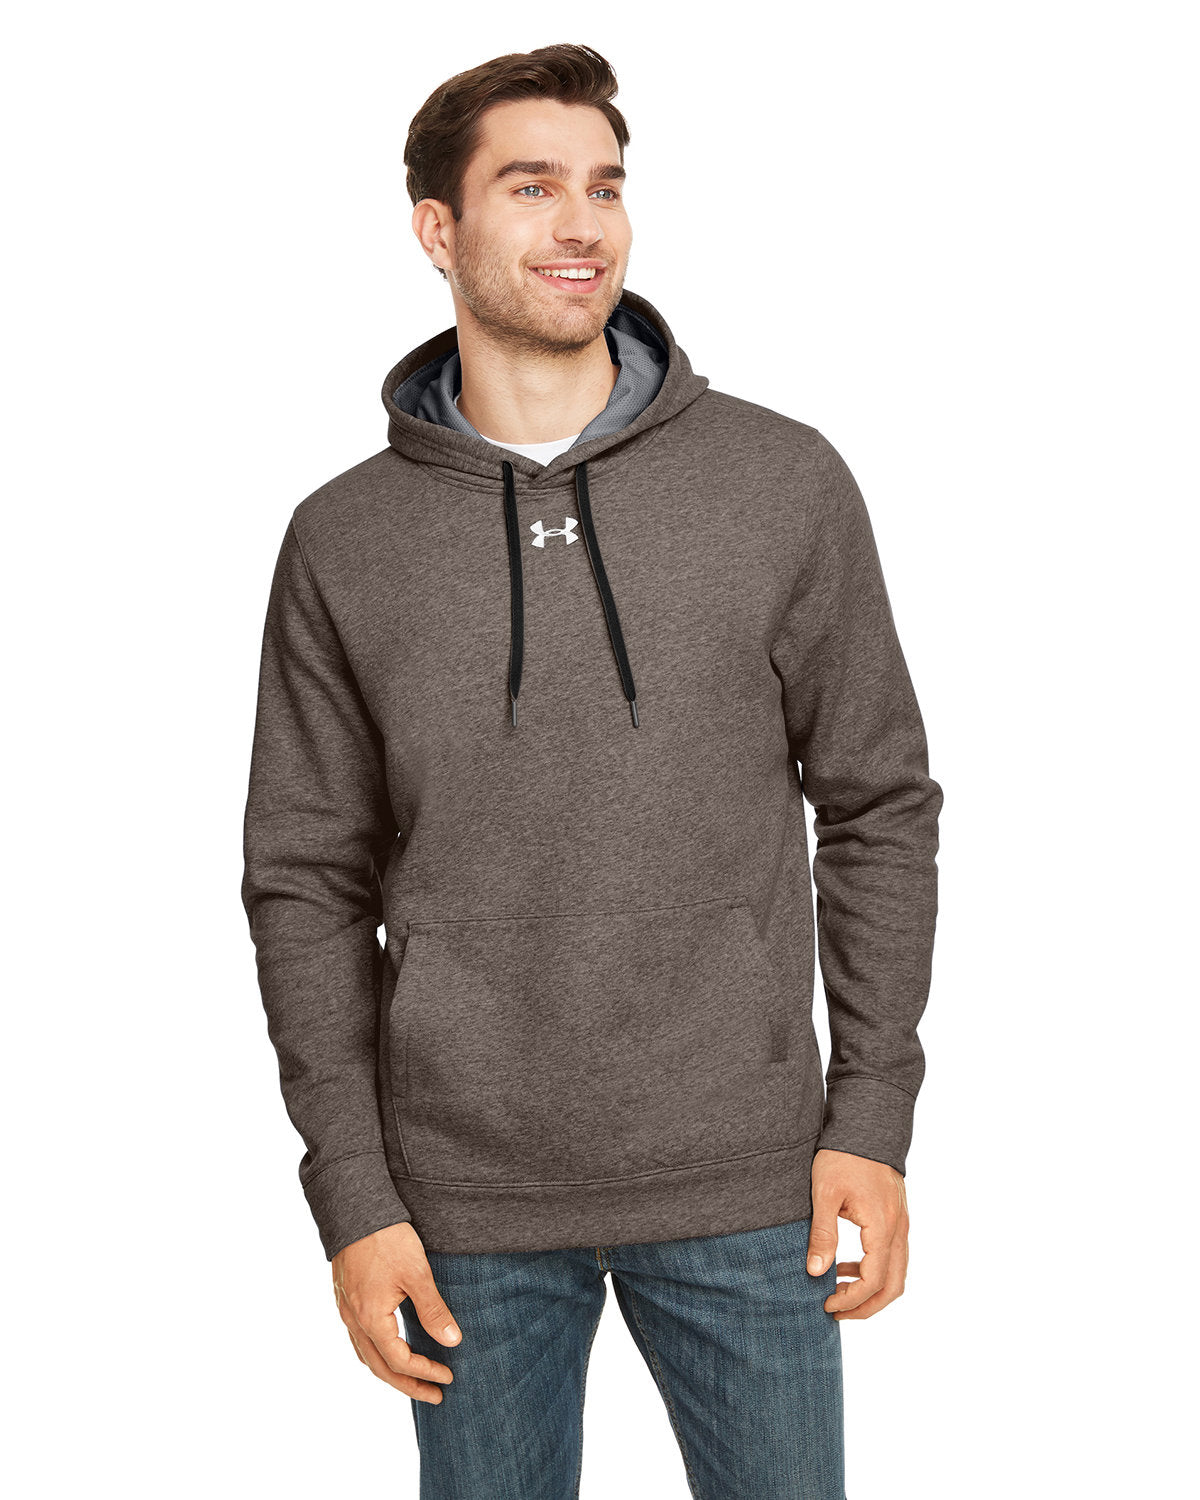 E5) 1300123 Under Armour Men's Hustle Pullover Hooded Sweatshirt - CONNECT WORK TOOLS